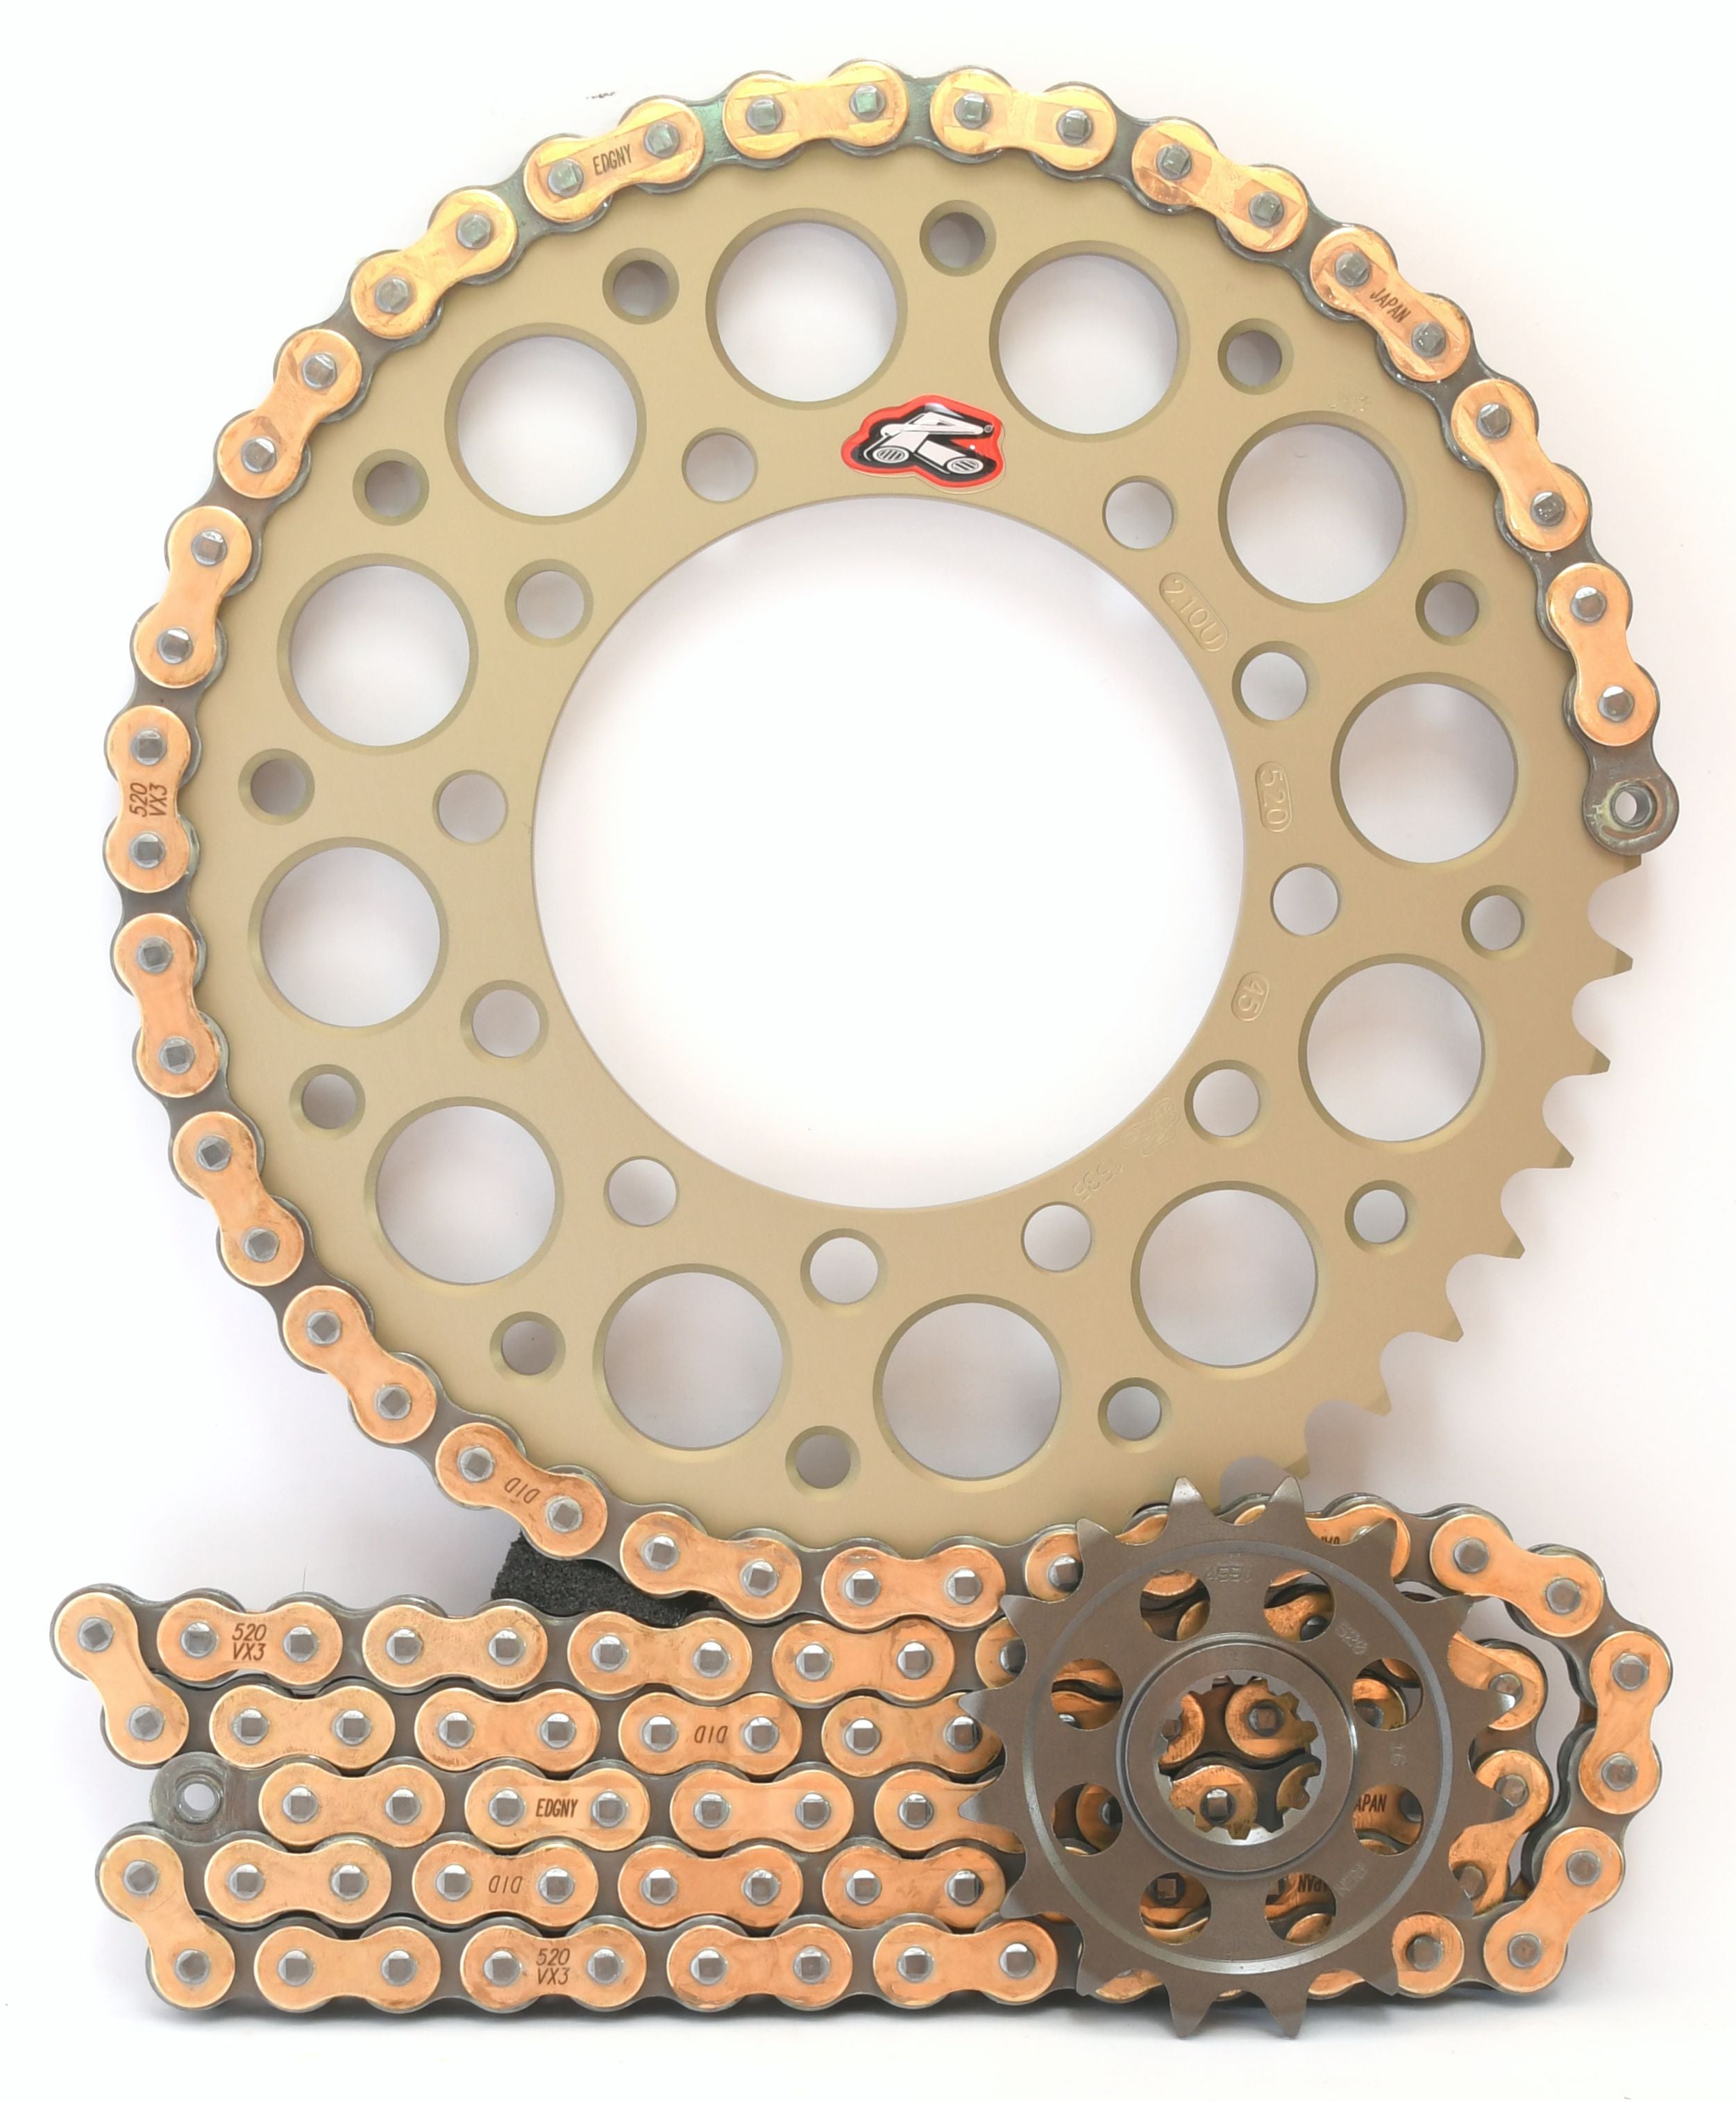 Renthal Ultralight and DID 520 Conversion Chain & Sprocket Kit for Honda CBR - Choose Your Gearing